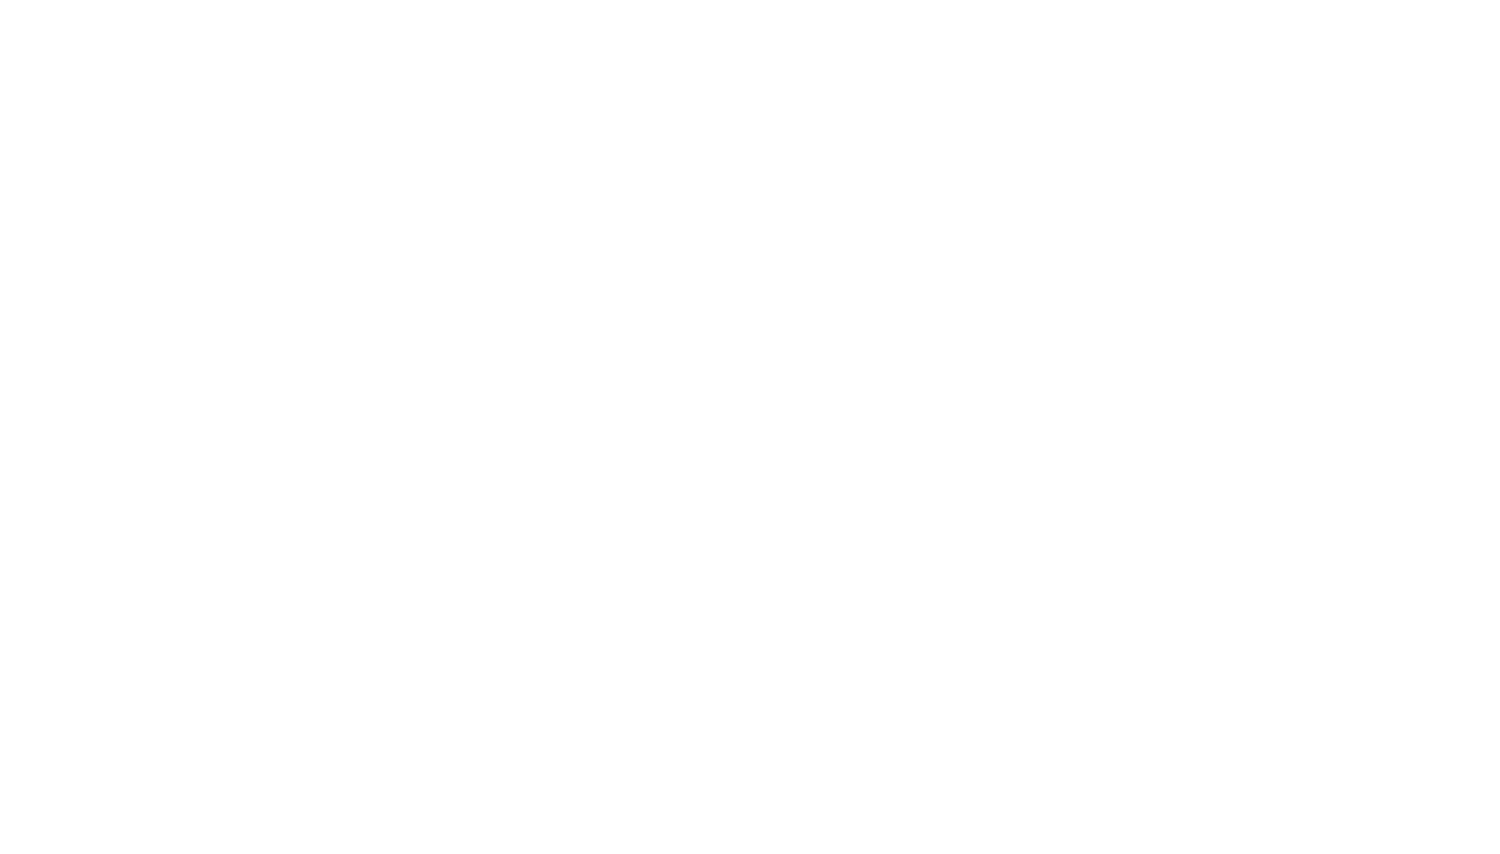 Experience Manly